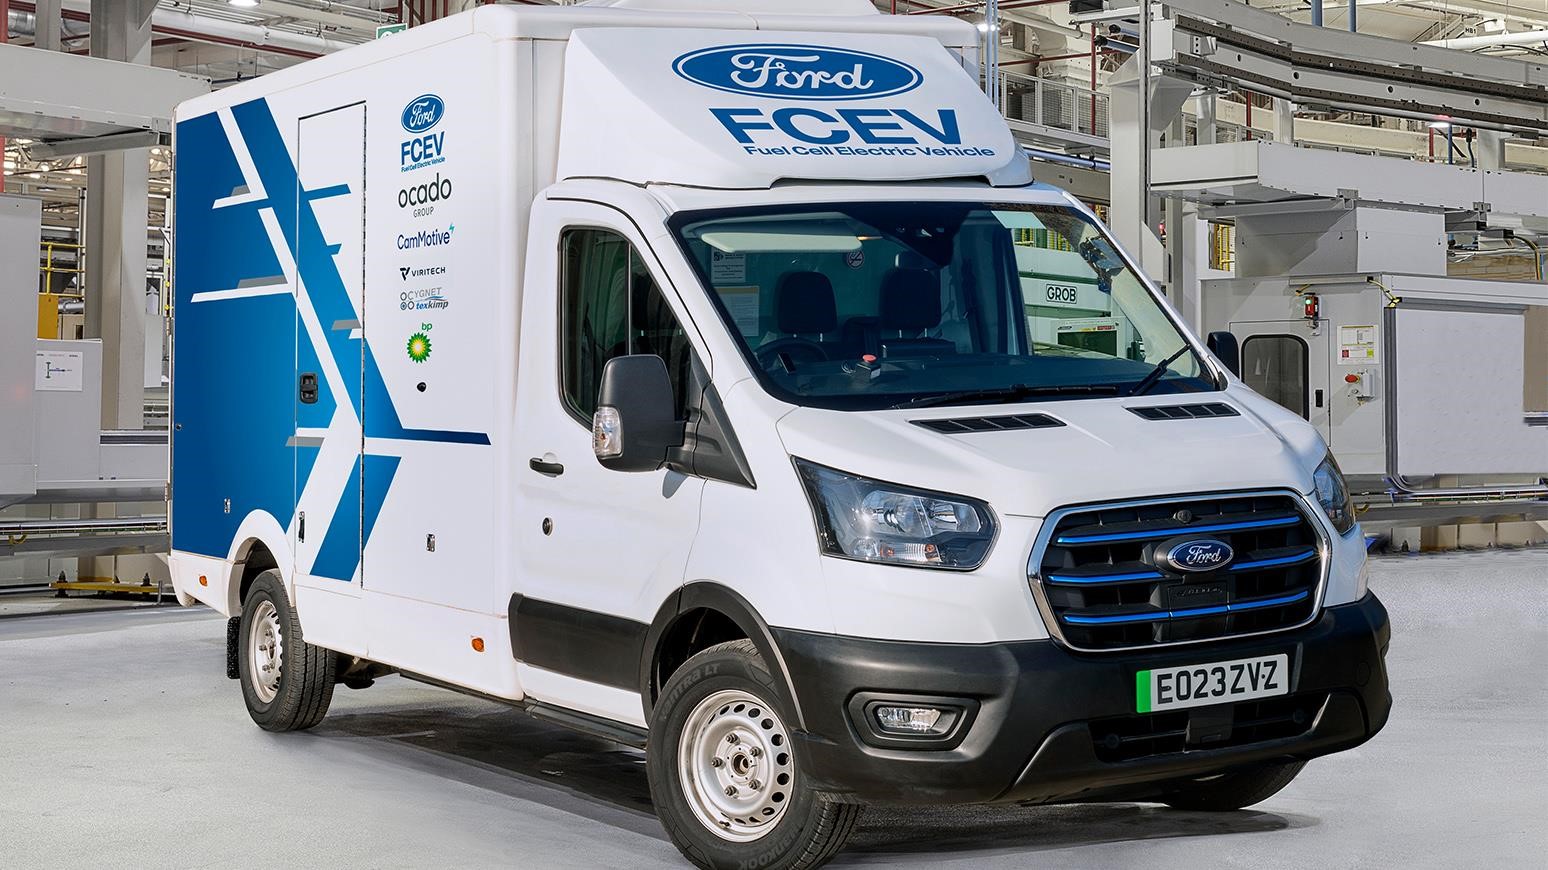 Ford Pursuing Hydrogen Fuel Cell Research Featuring E-Transit